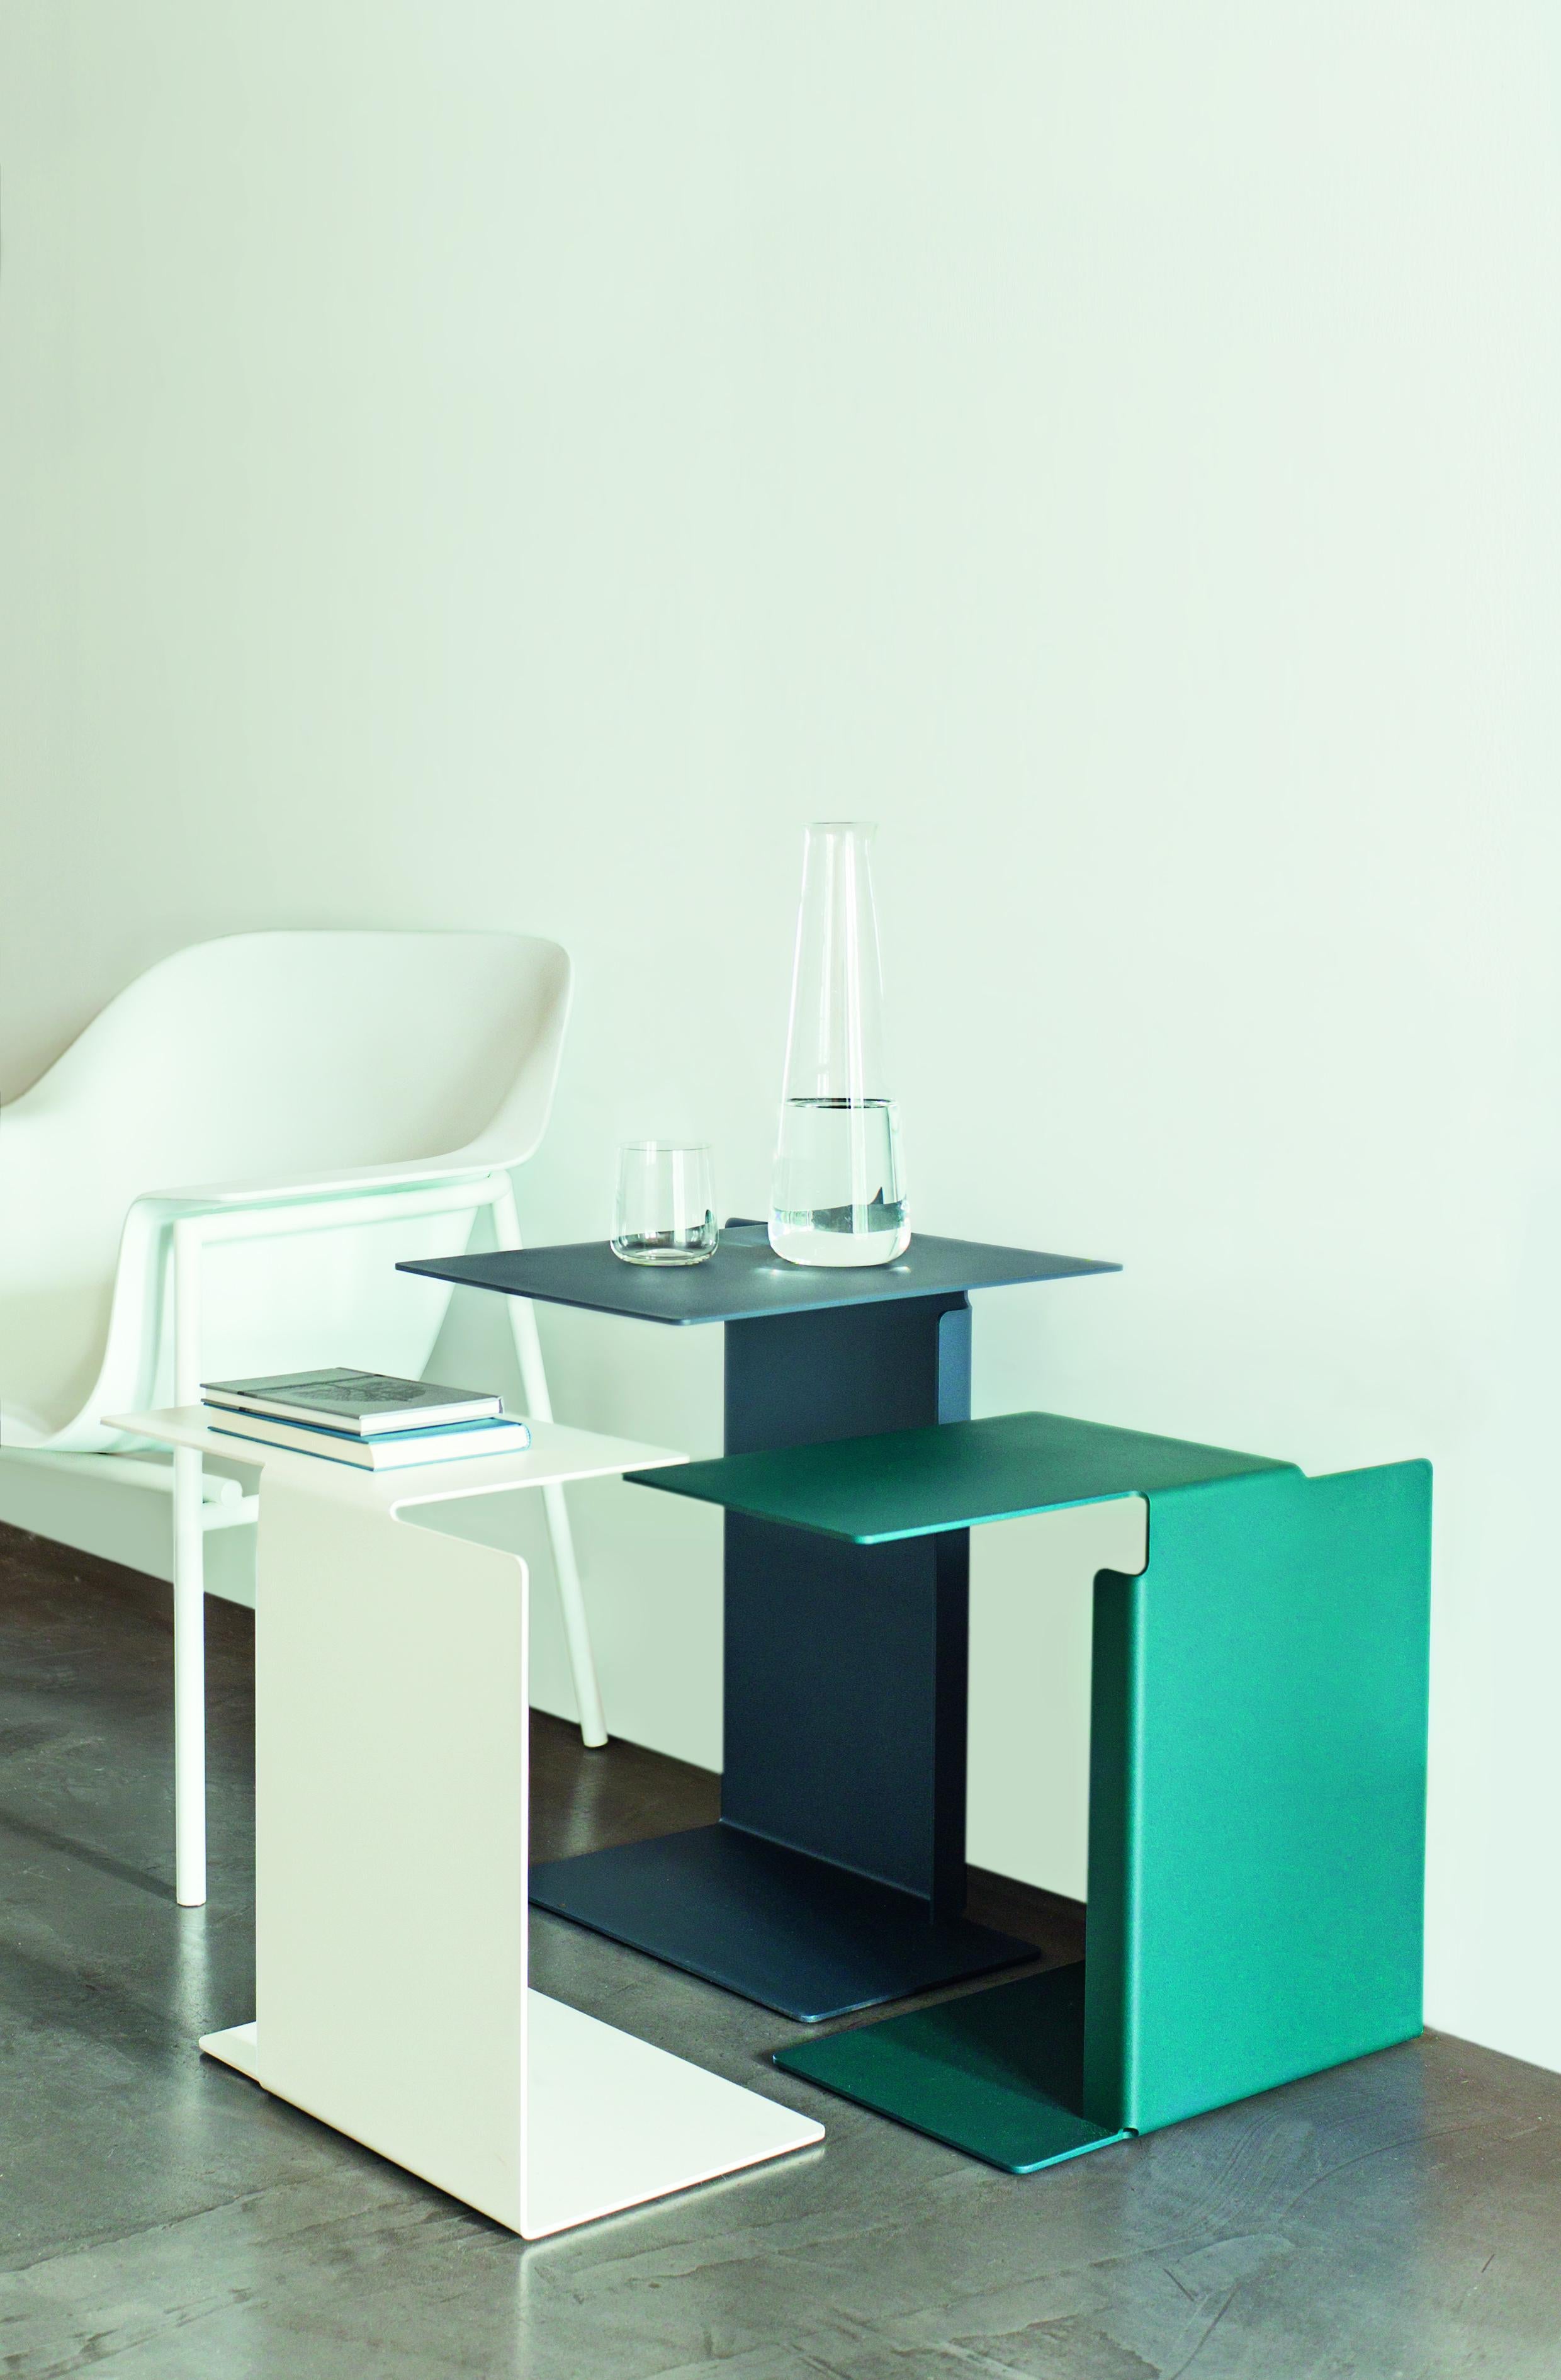 Powder-Coated ClassiCon Diana A Side Table in Ocean Blue by Konstantin Grcic For Sale